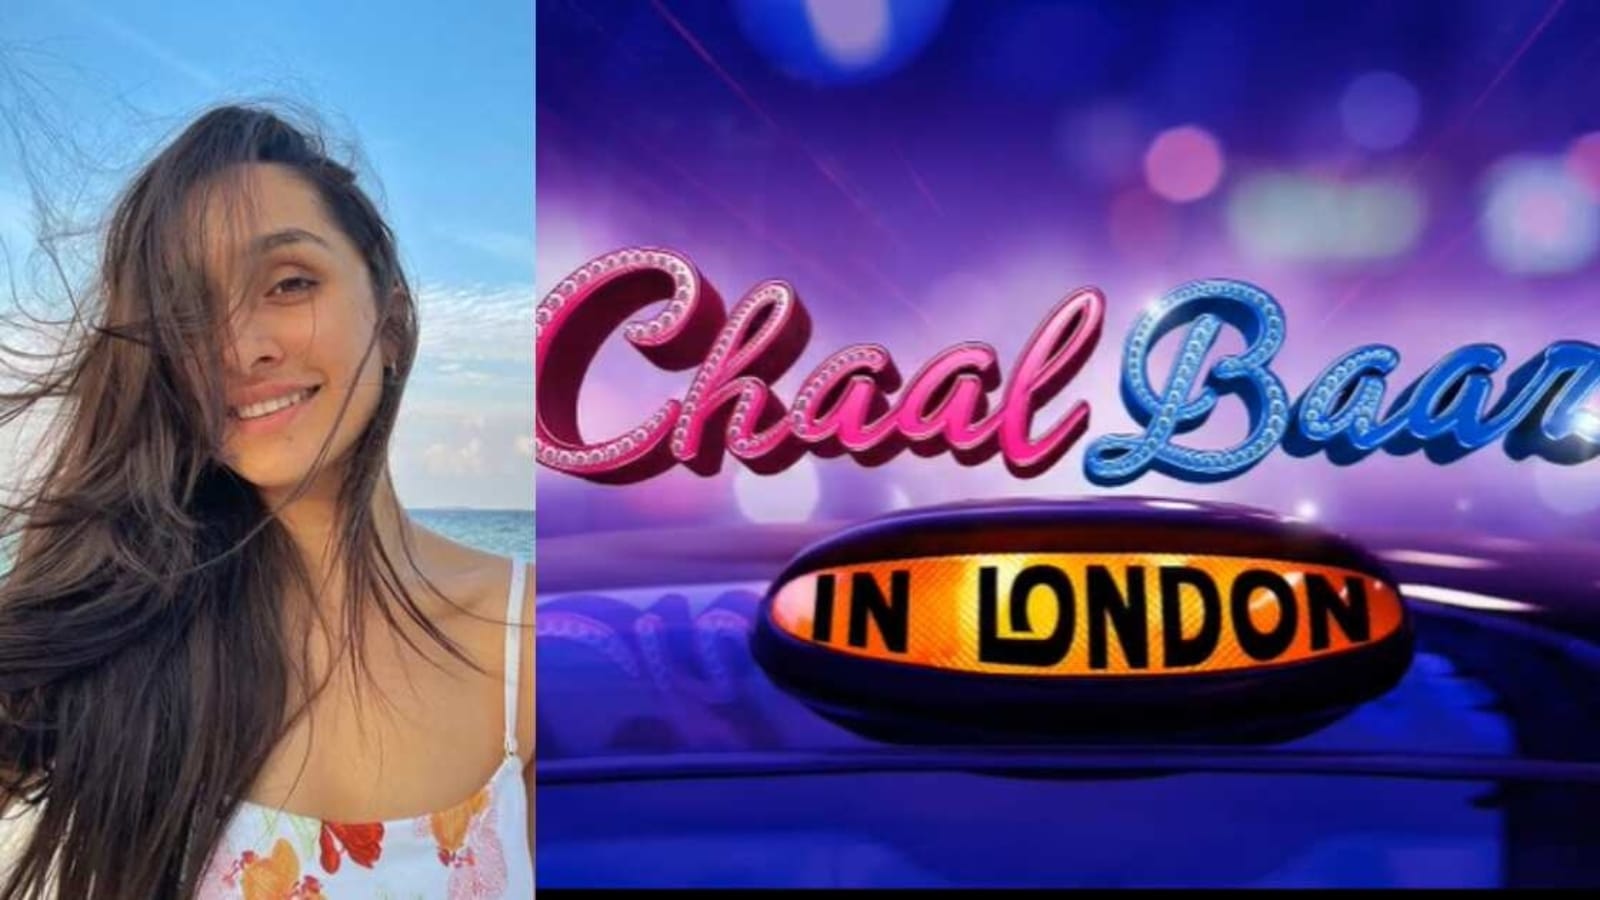 Just in: Shraddha Kapoor to play a double role in Chaalbaaz In London |  Filmfare.com